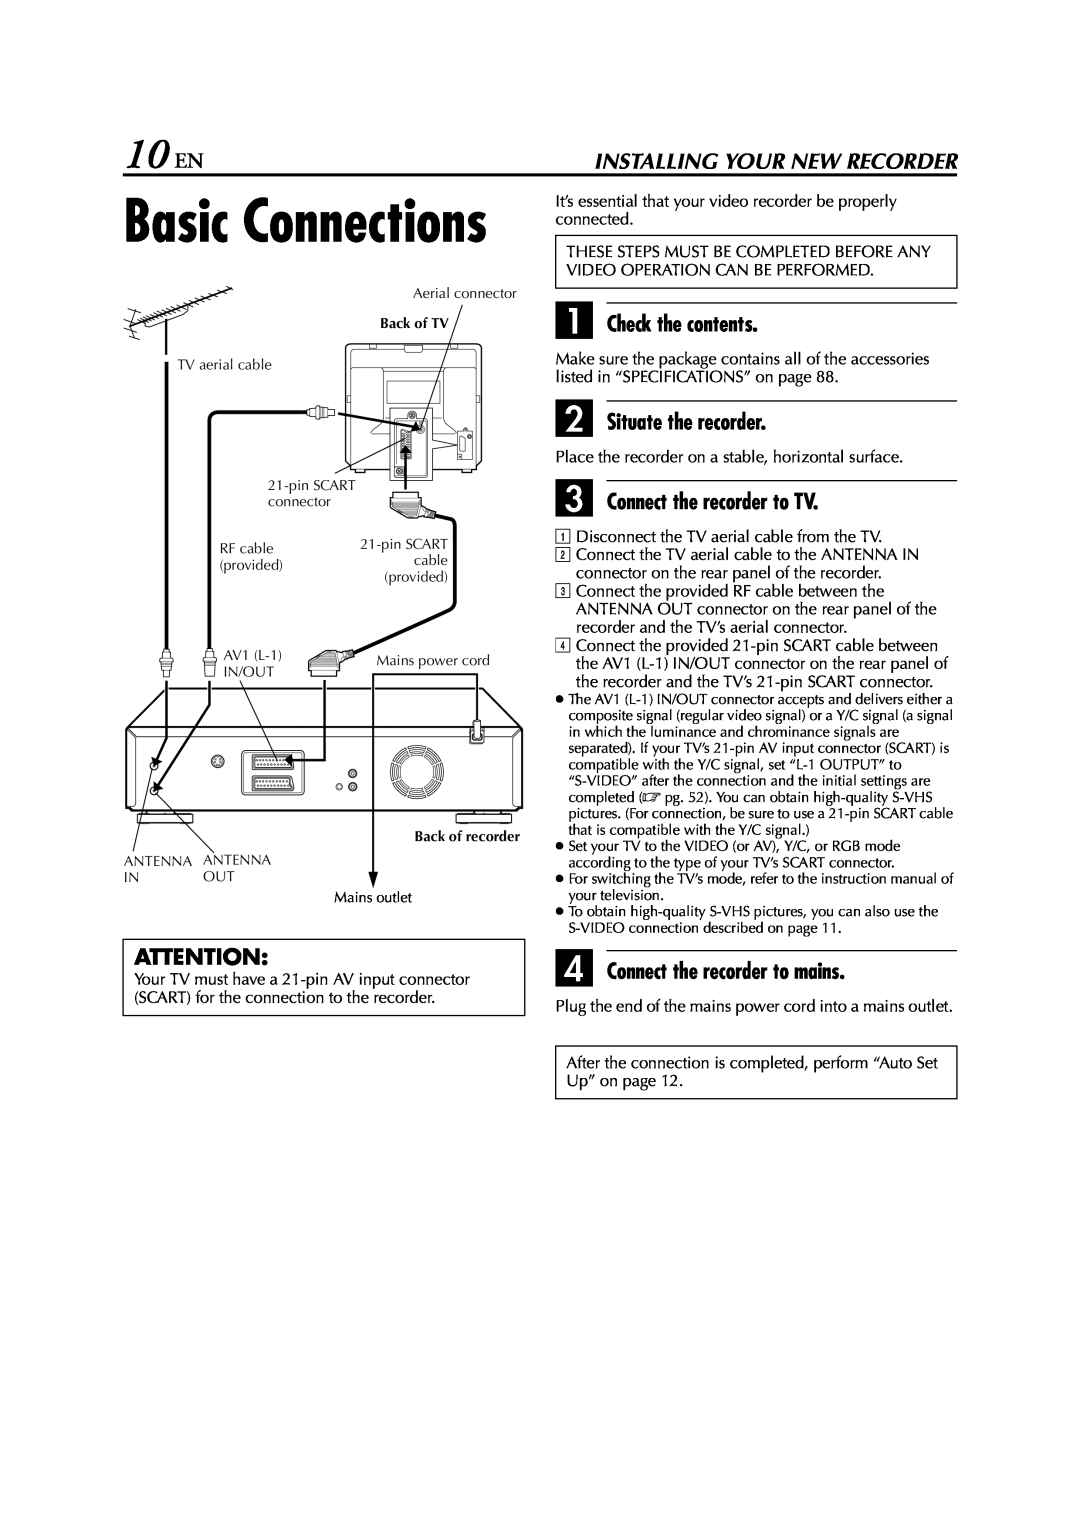 JVC LPT0616-001A Basic Connections, 10 EN, A Check the contents, B Situate the recorder, C Connect the recorder to TV 